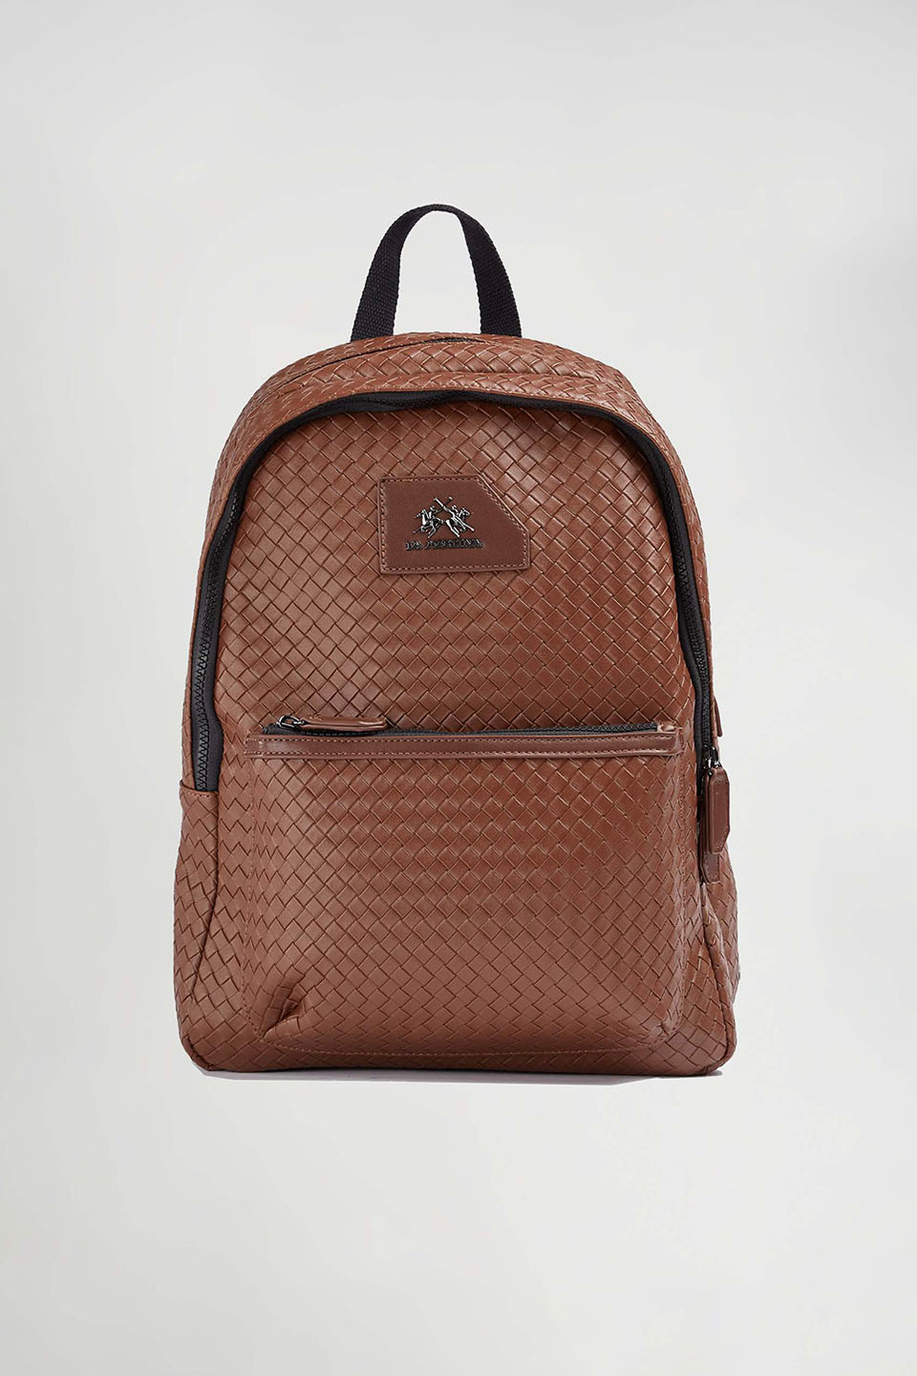 PU leather backpack - Accessories | La Martina - Official Online Shop